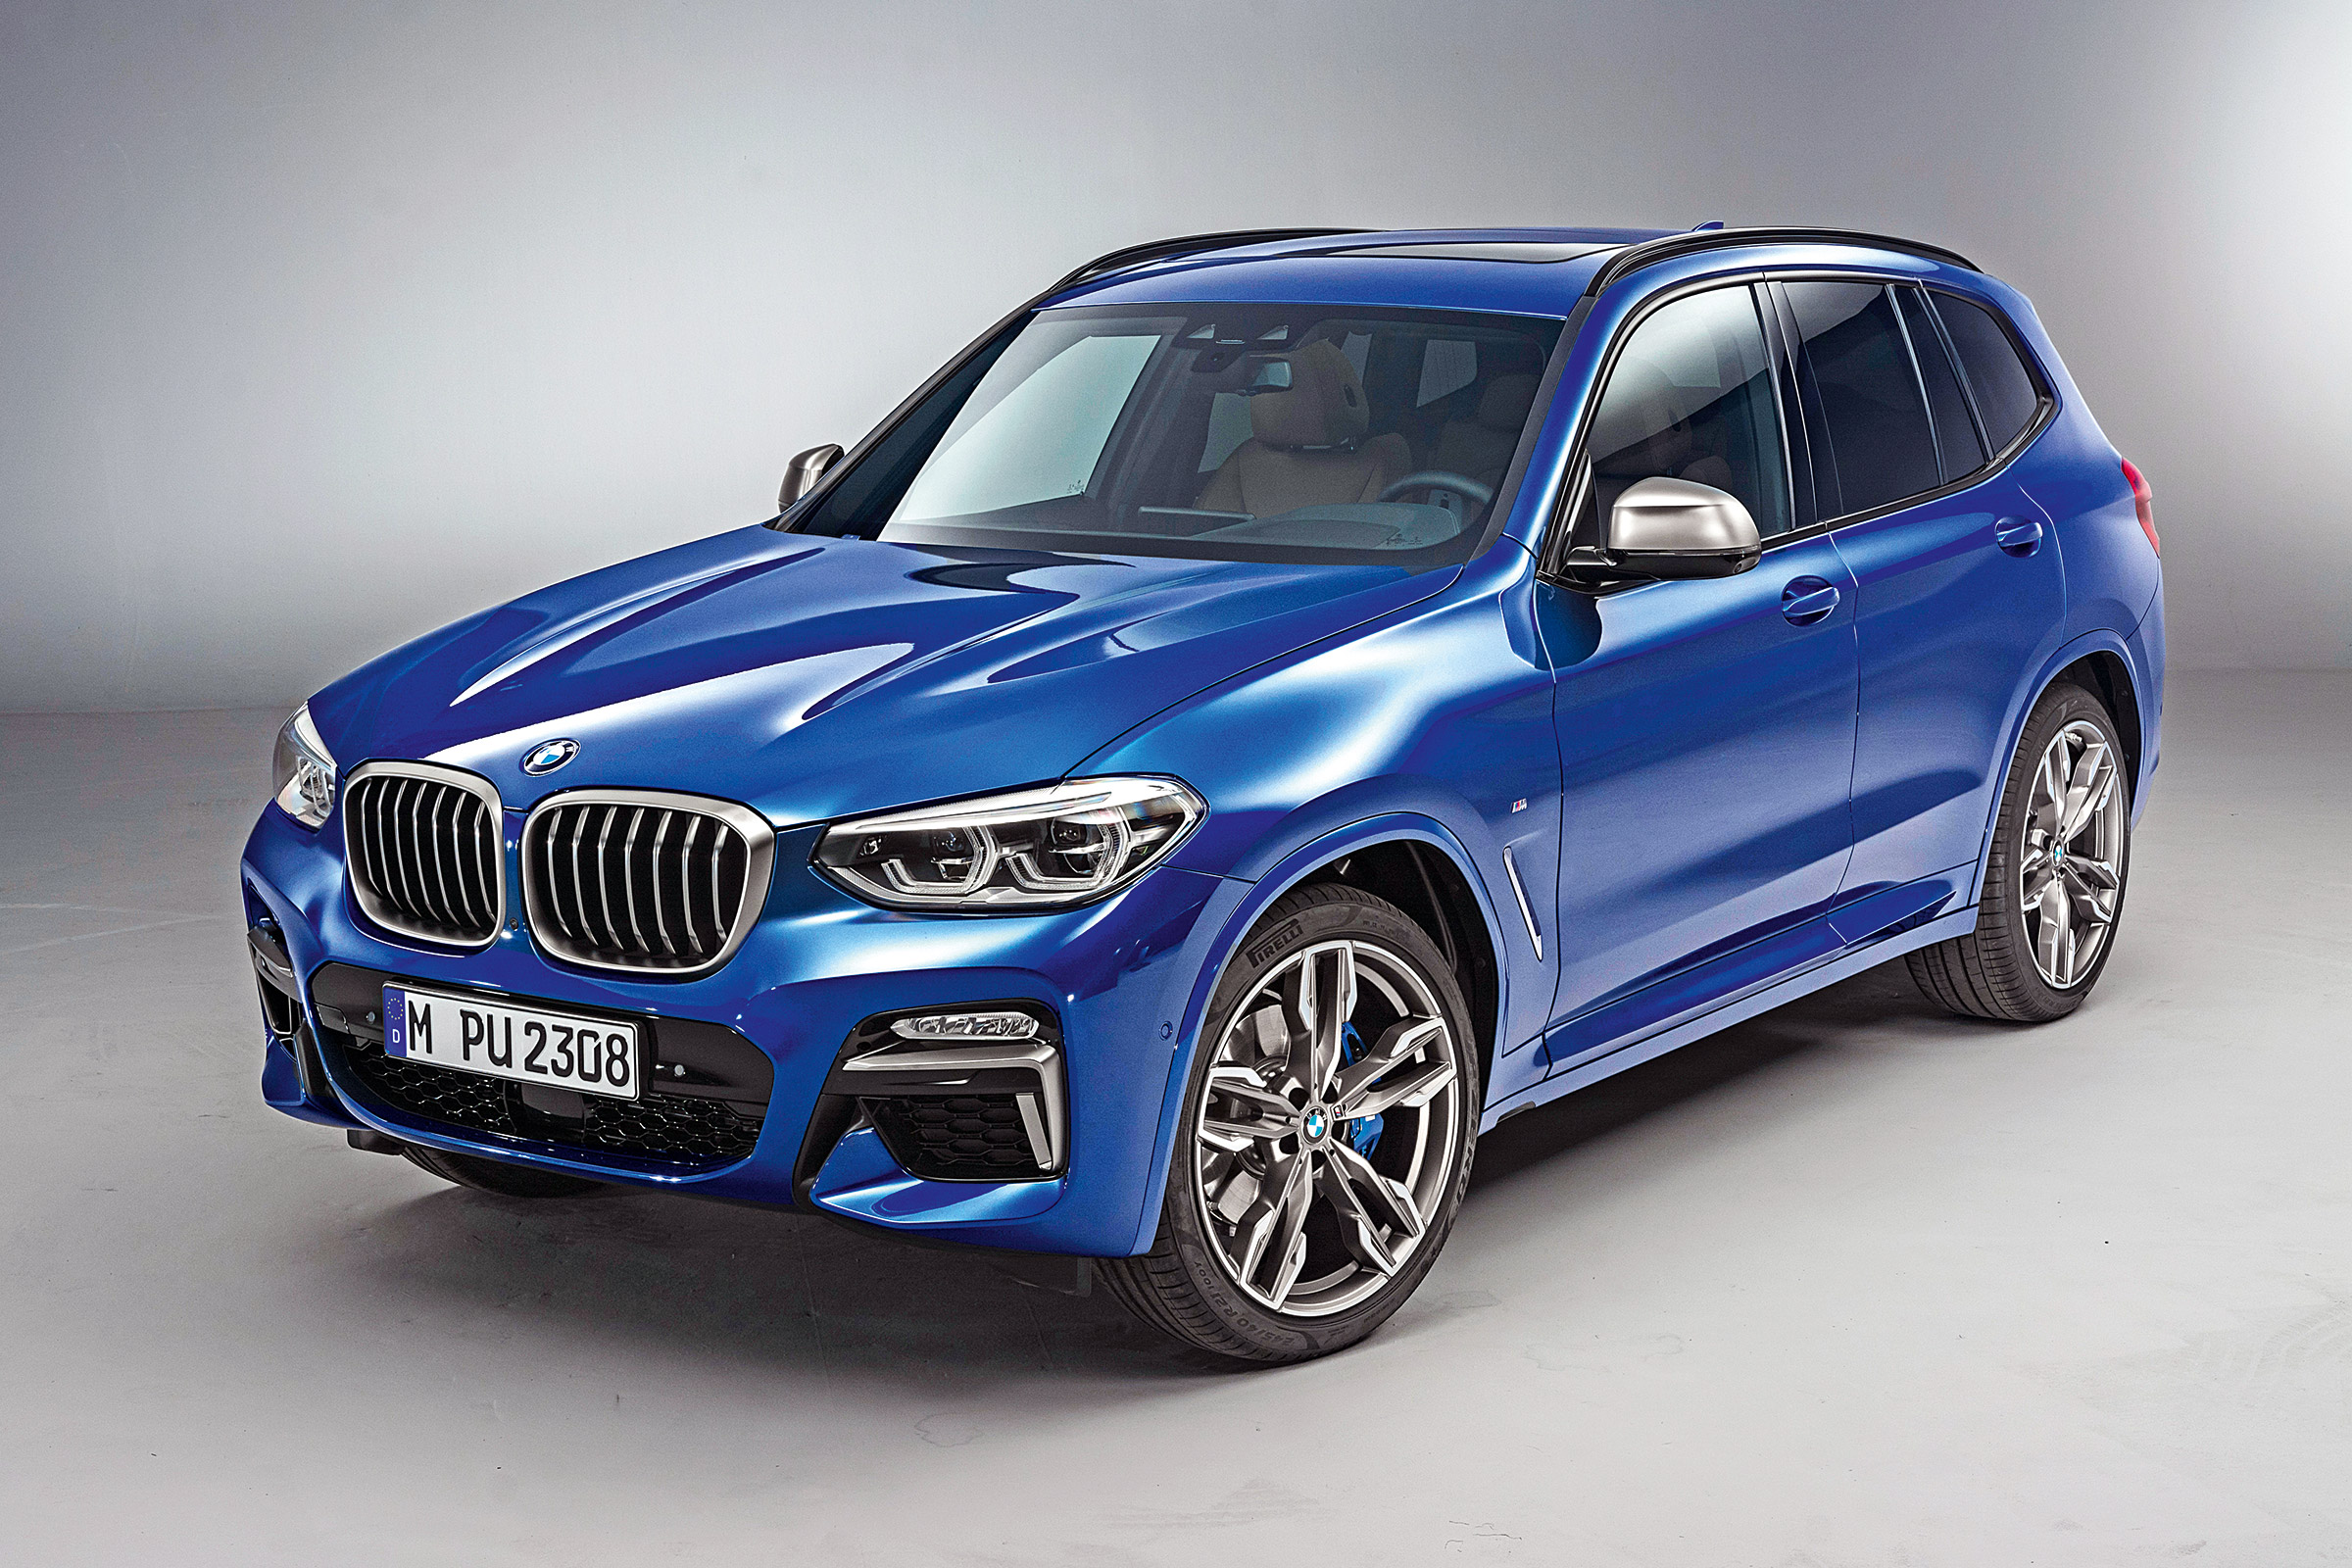 New 2017 BMW X3 SUV: details, prices and pics | Auto Express